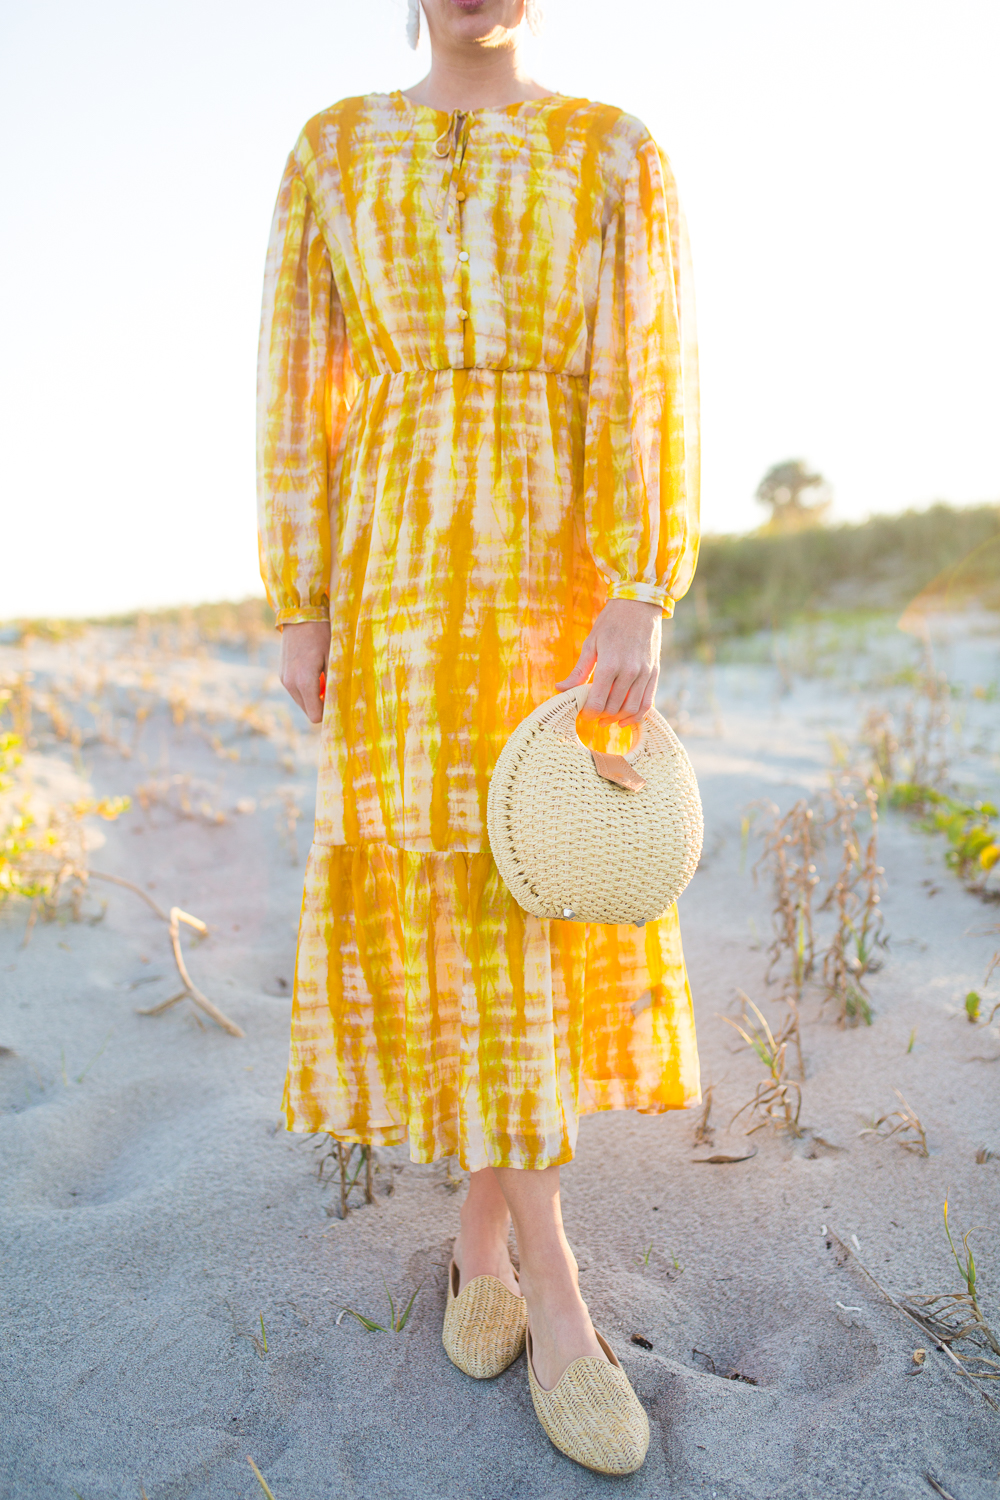 Bright Spring Dresses for Everyday / Yellow Spring Dresses / Bright Dresses to Add Happiness To Your Day / Spring Dress Inspiration / What to Wear on a Tropical Vacation - Sunshine Style, A Florida Fashion and Lifestyle Blog by Katie